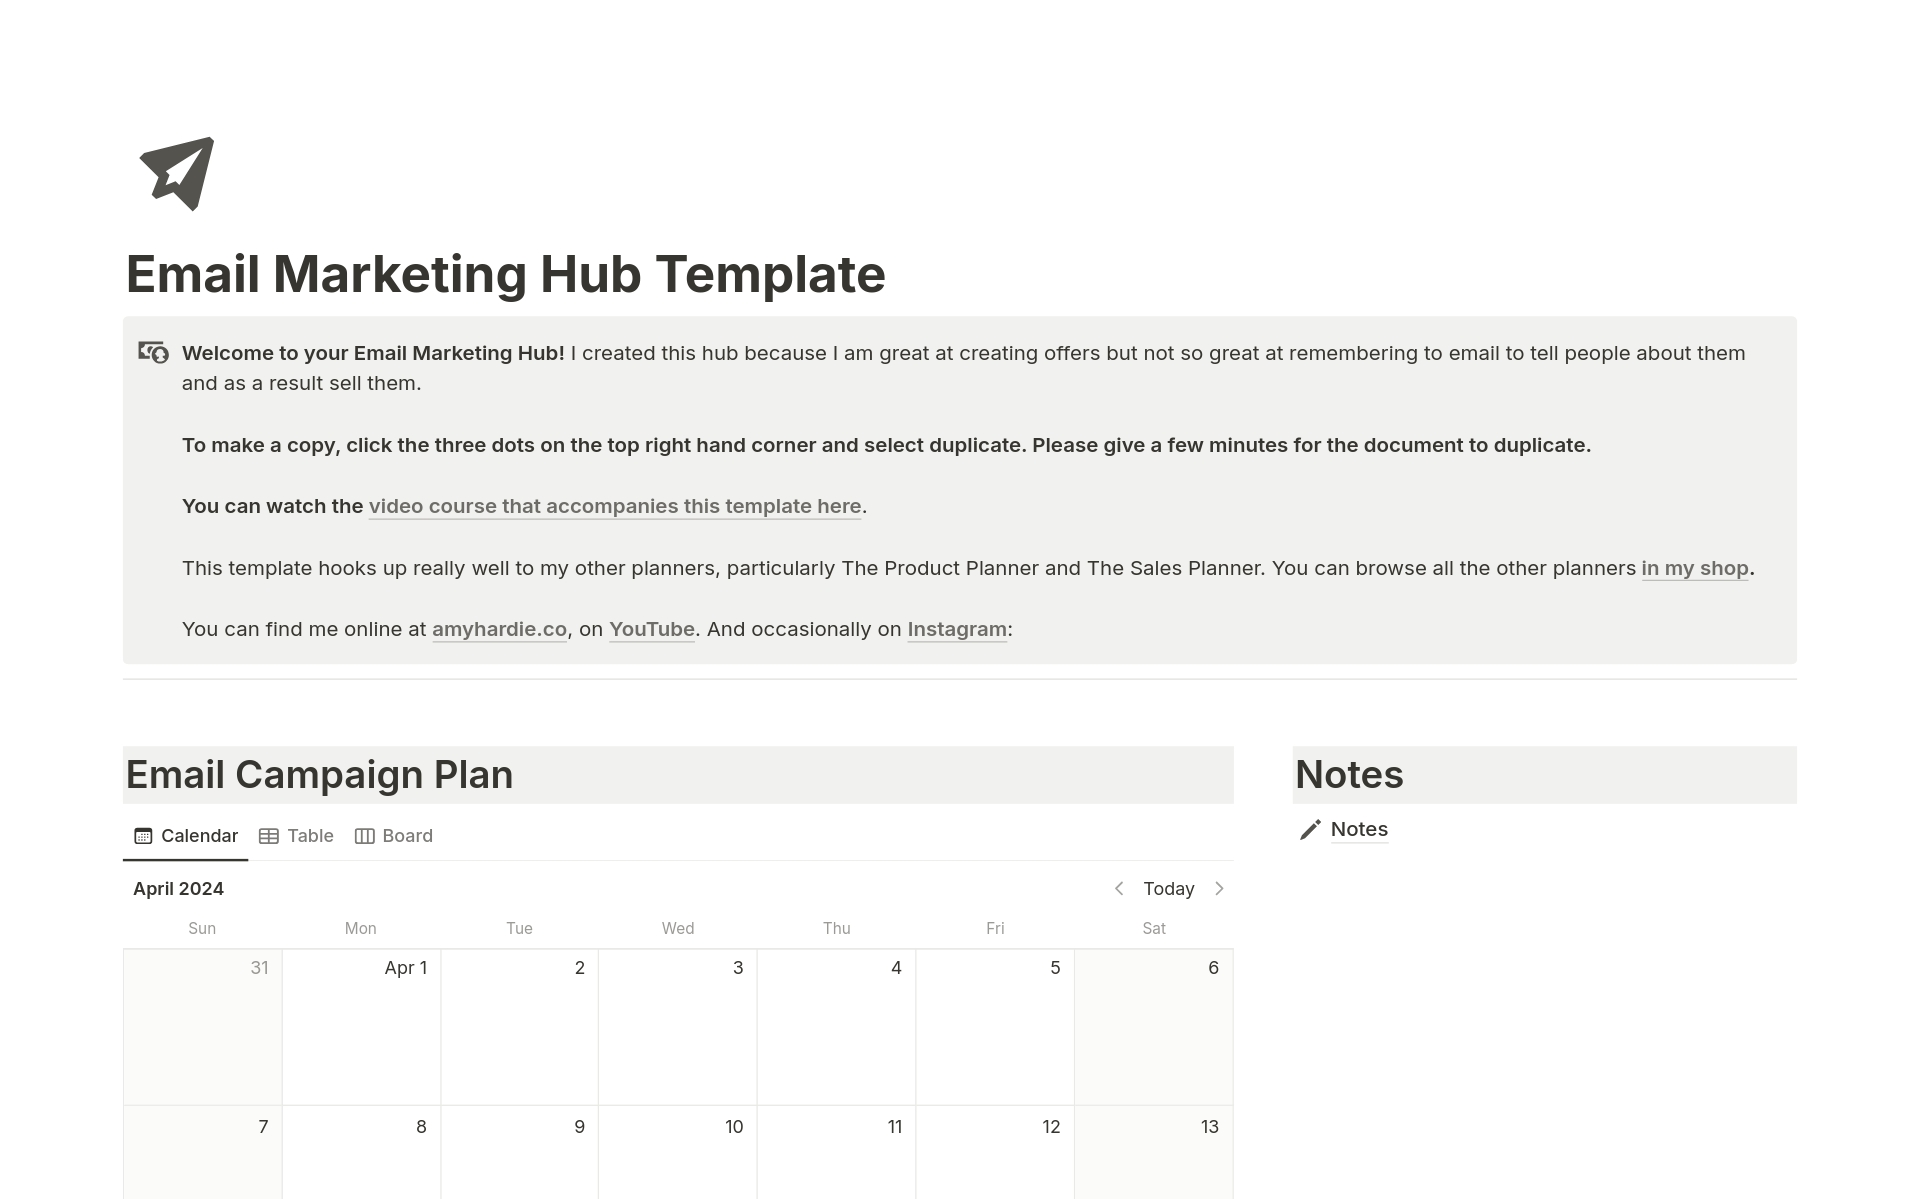 Organise your email marketing including weekly newsletters and longer sequences and campaigns